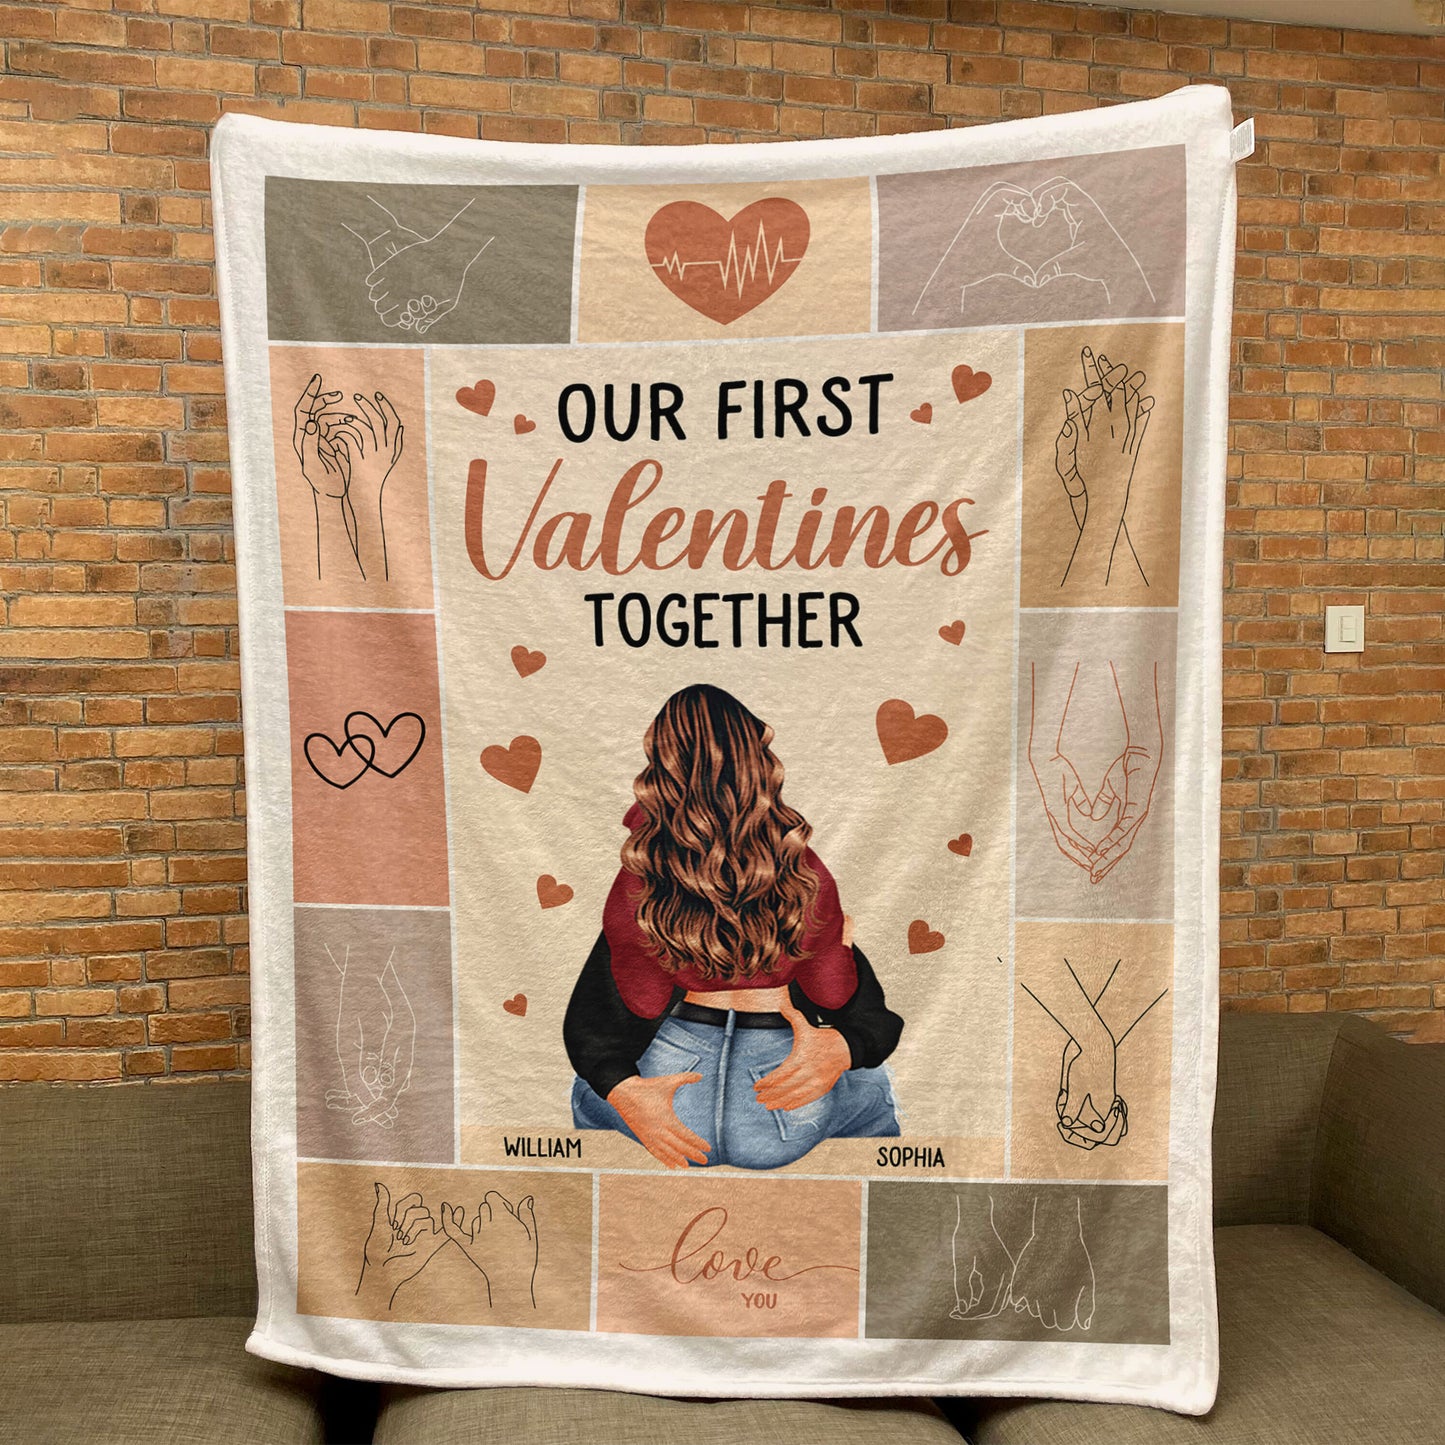 Our First Valentines Together - Personalized Blanket